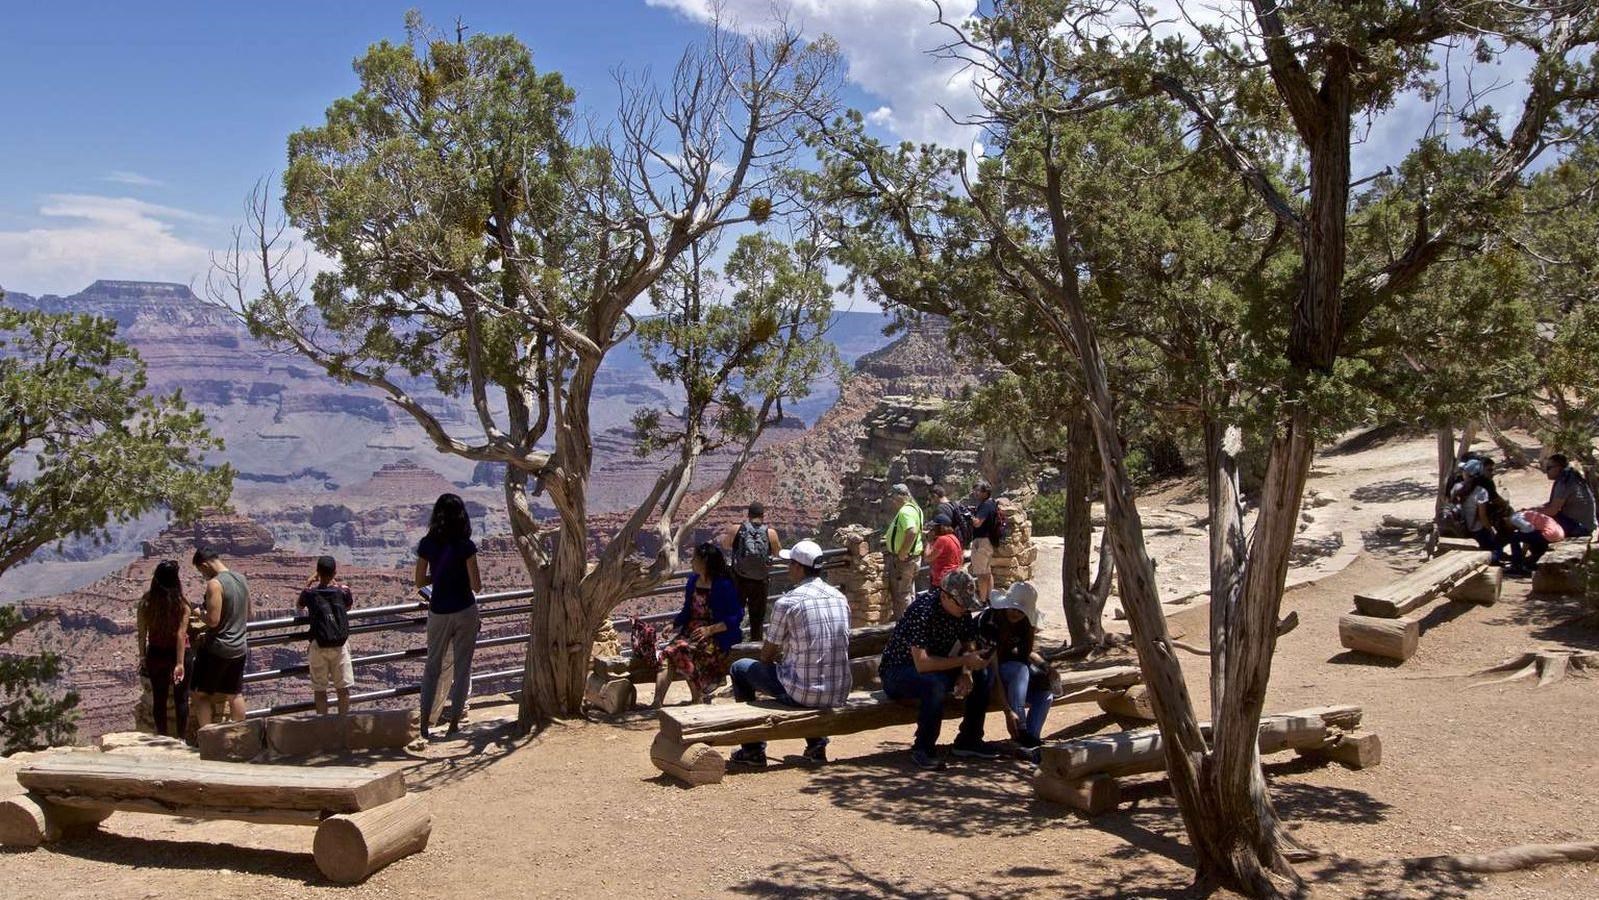 Visitors sit on stone and wooden benches overlooking the Grand Canyon, surrounded by stout trees.